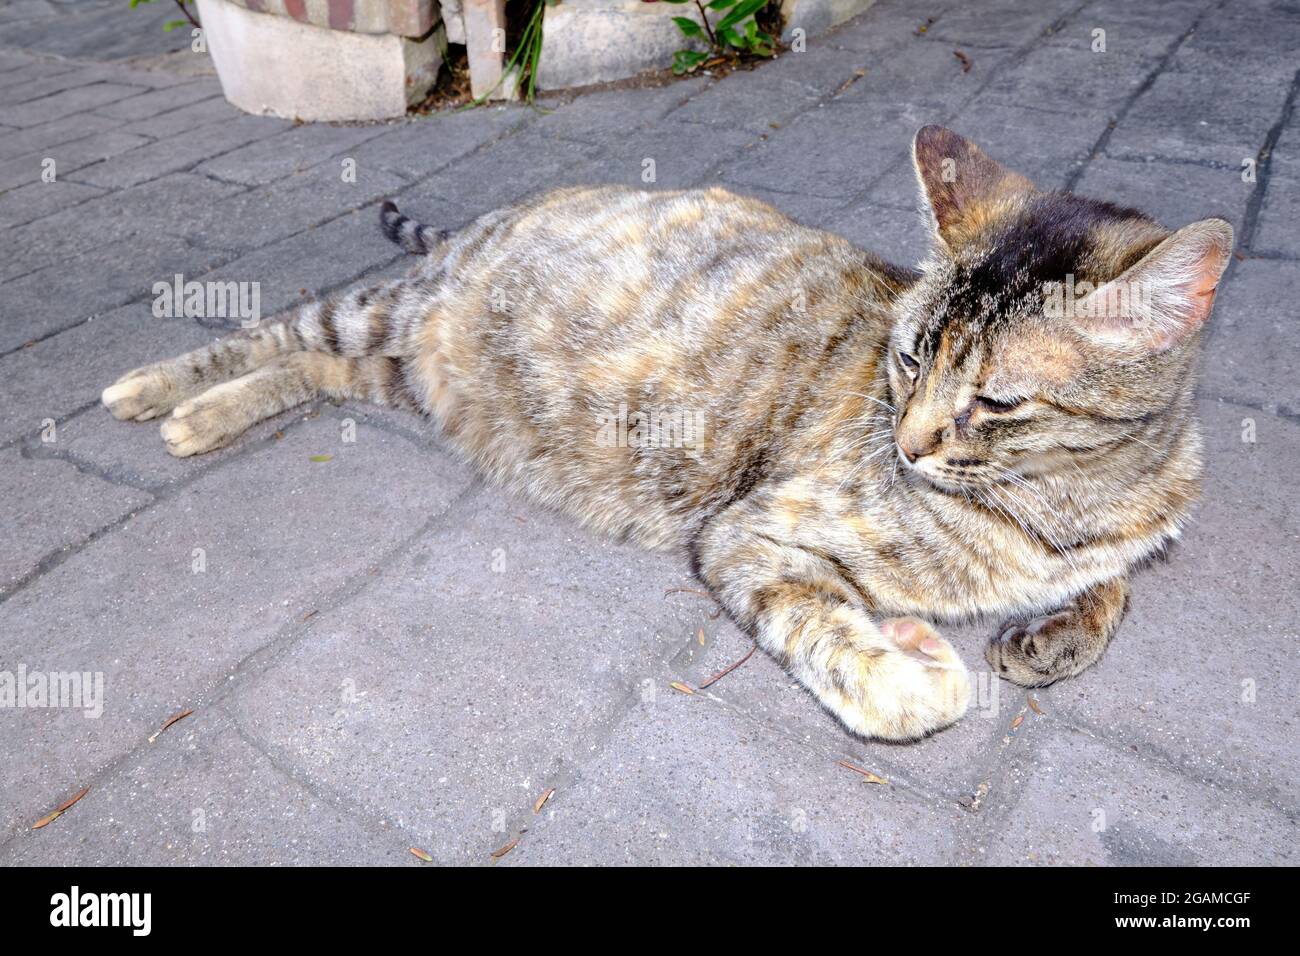 Pregnant cat resting. Cat with a big belly lying on the cement. Stock Photo